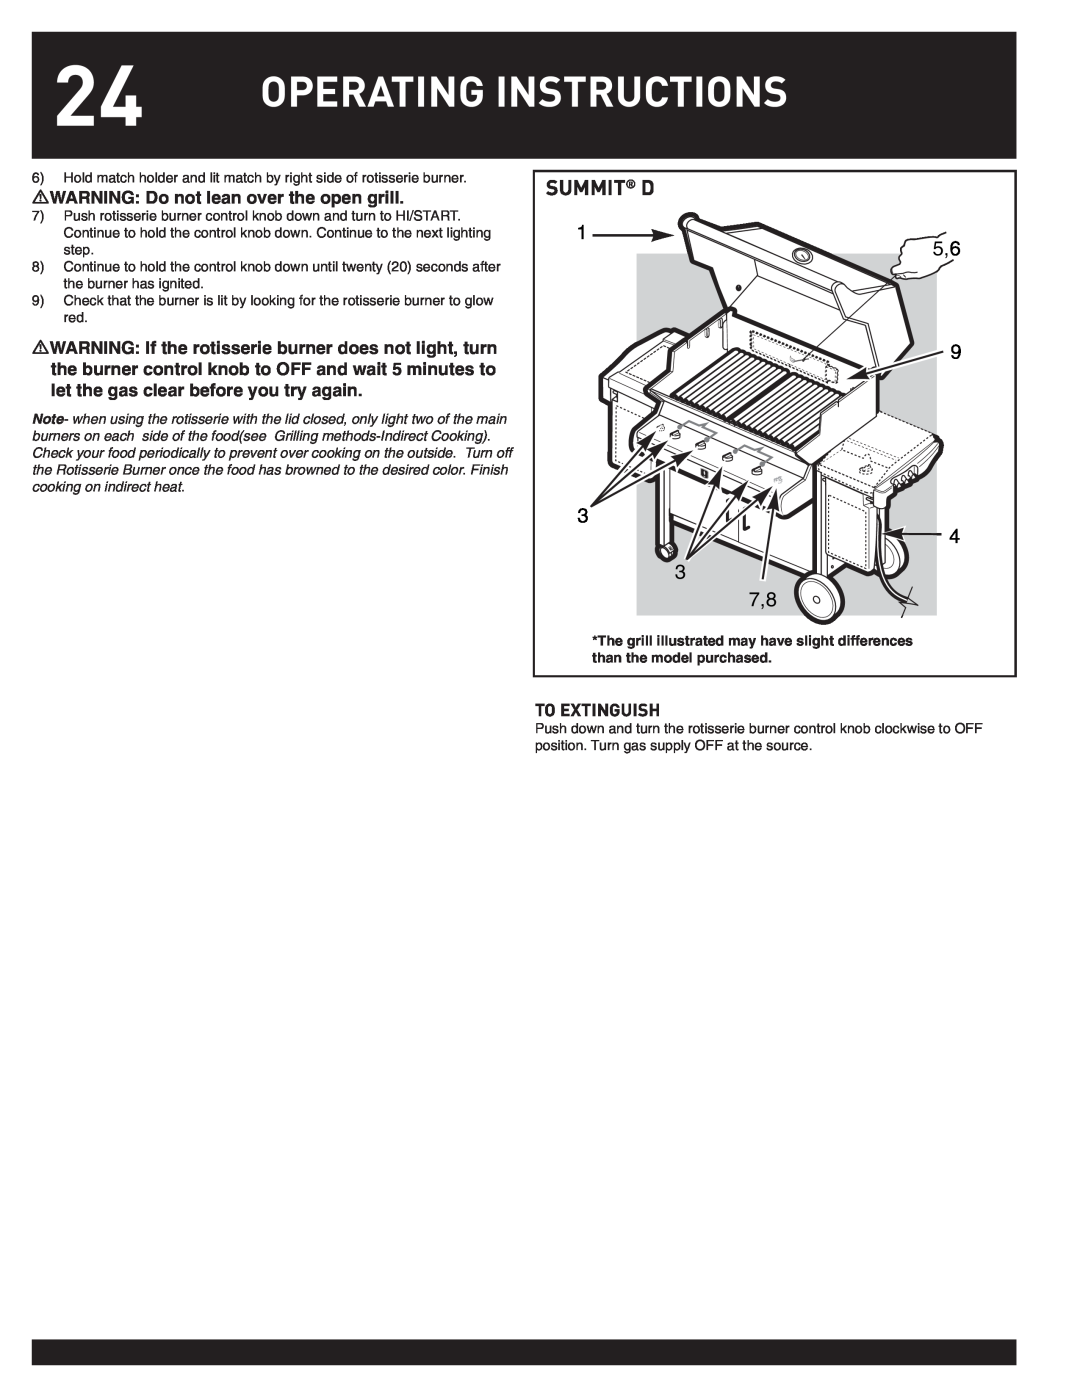 Weber 38044 manual Operating Instructions, Summit D, To Extinguish 